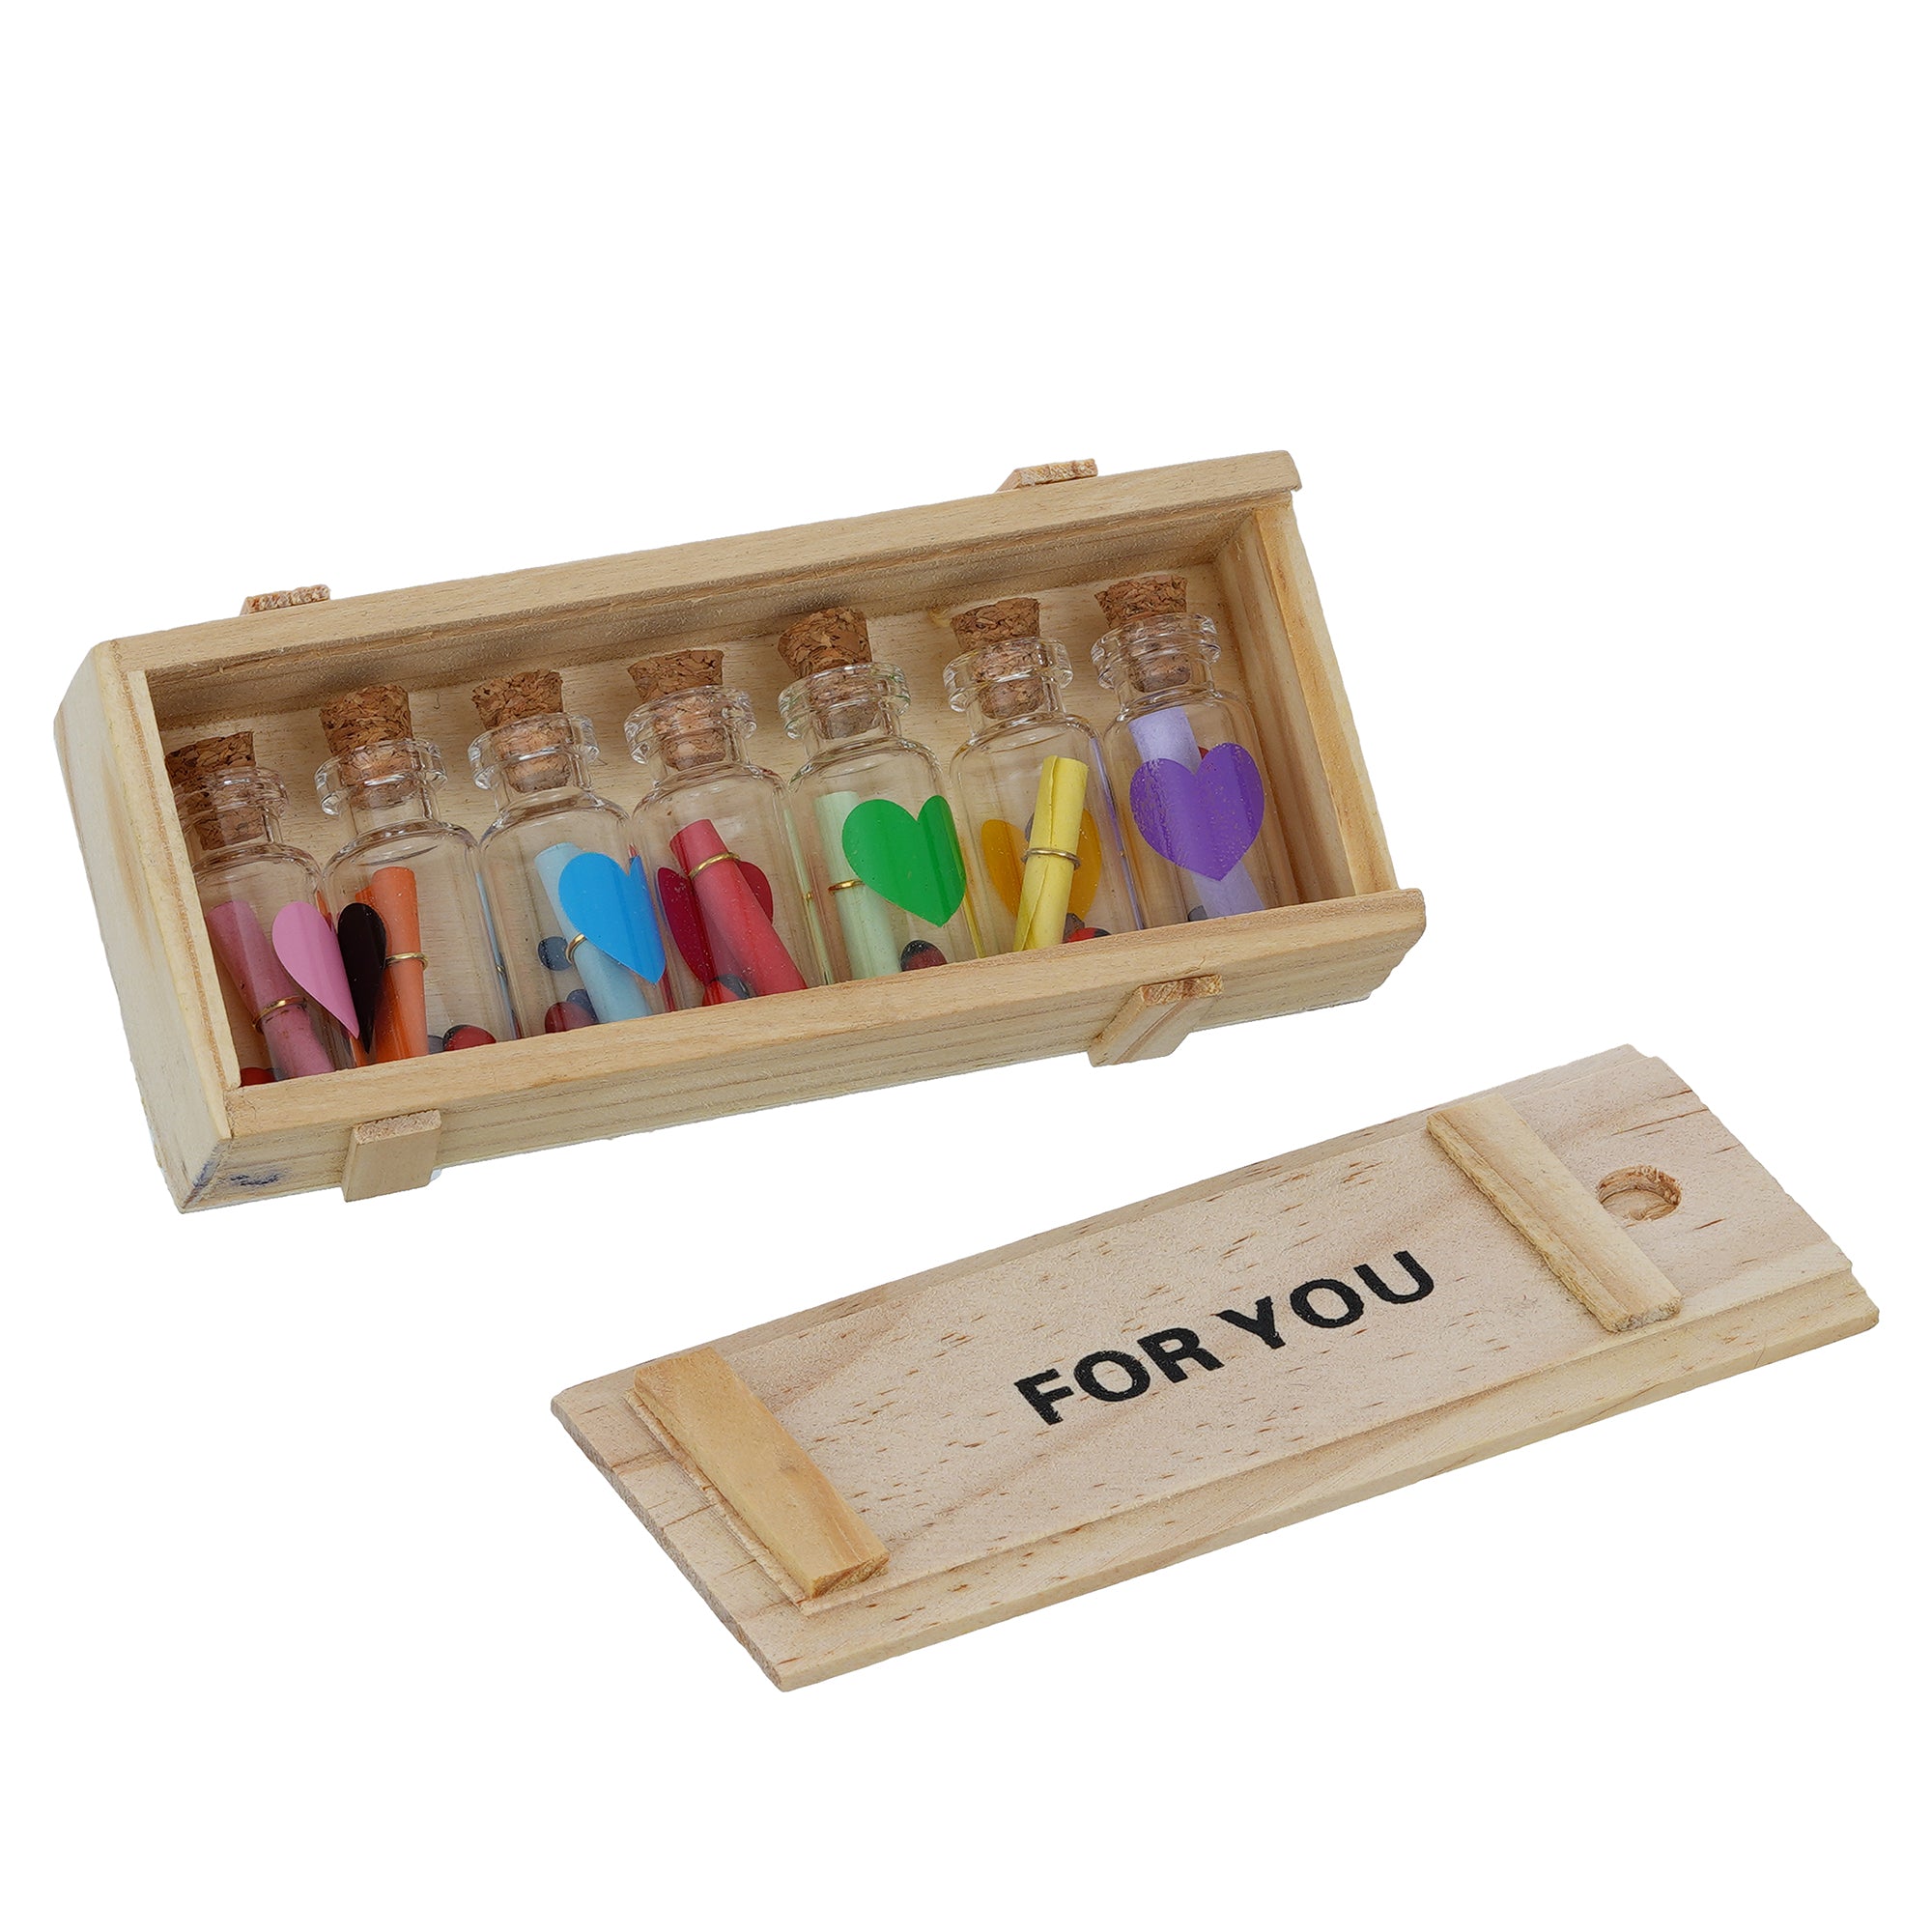 Set Of 7 Personal Messages Greeting Bottles In Wooden Box "For You" 3